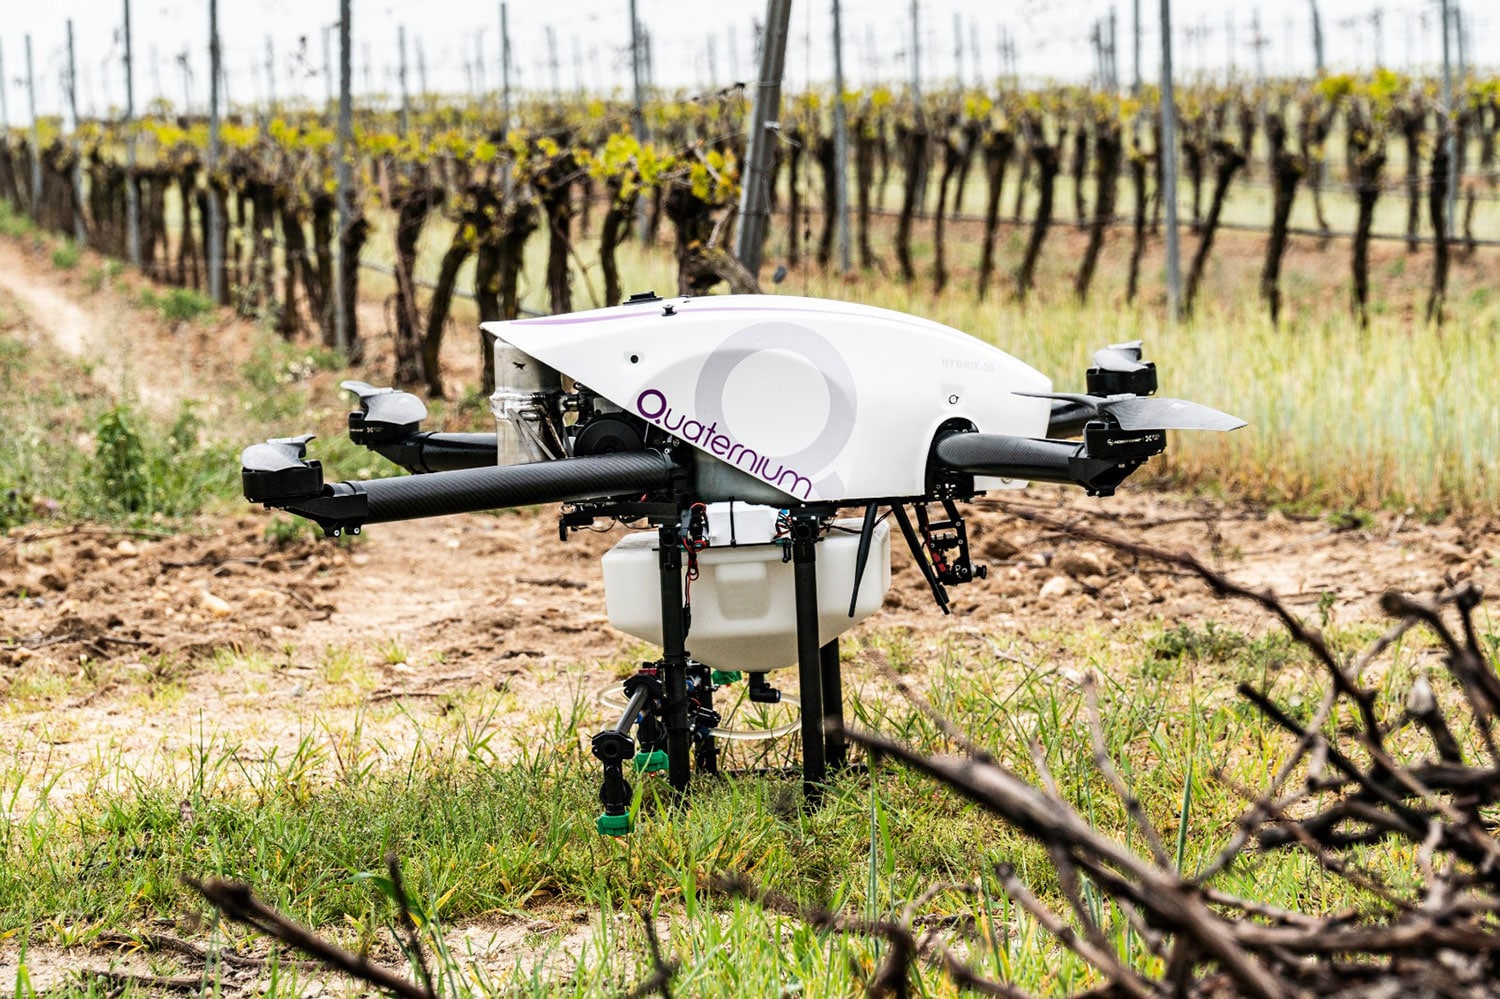 The crop-spraying drones that go where tractors can't - BBC News